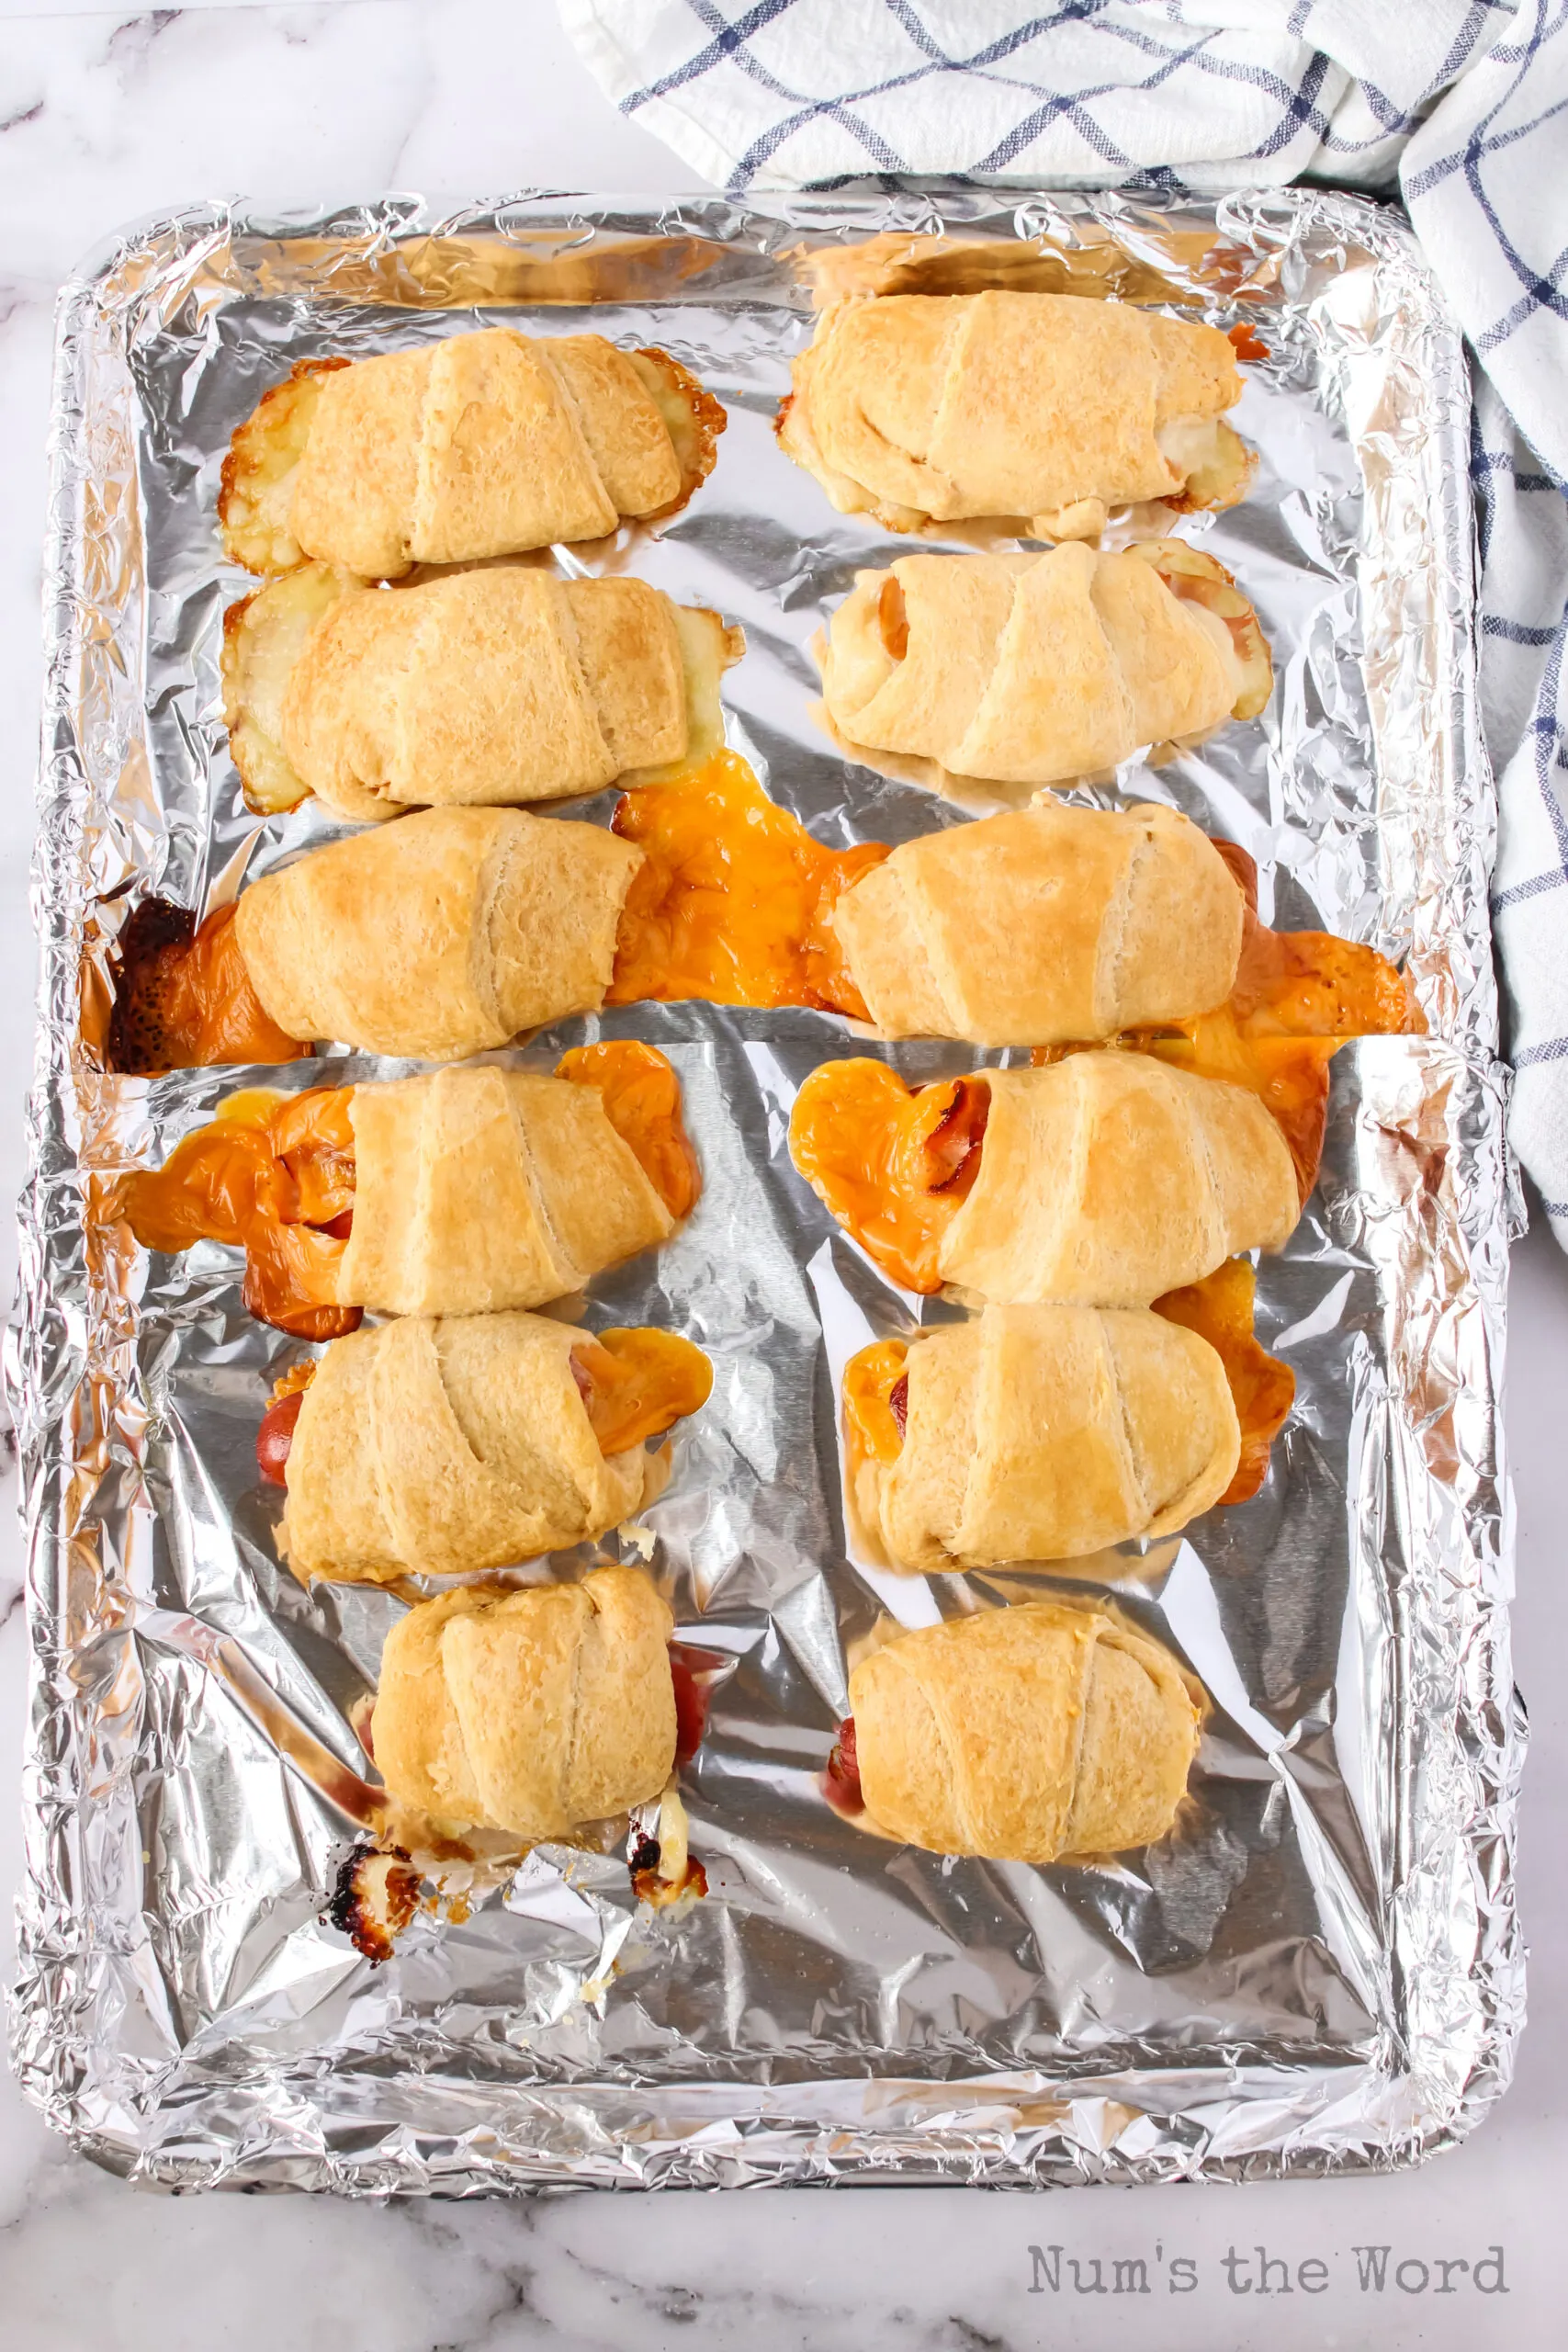 crescent roll ups on a tray, baked